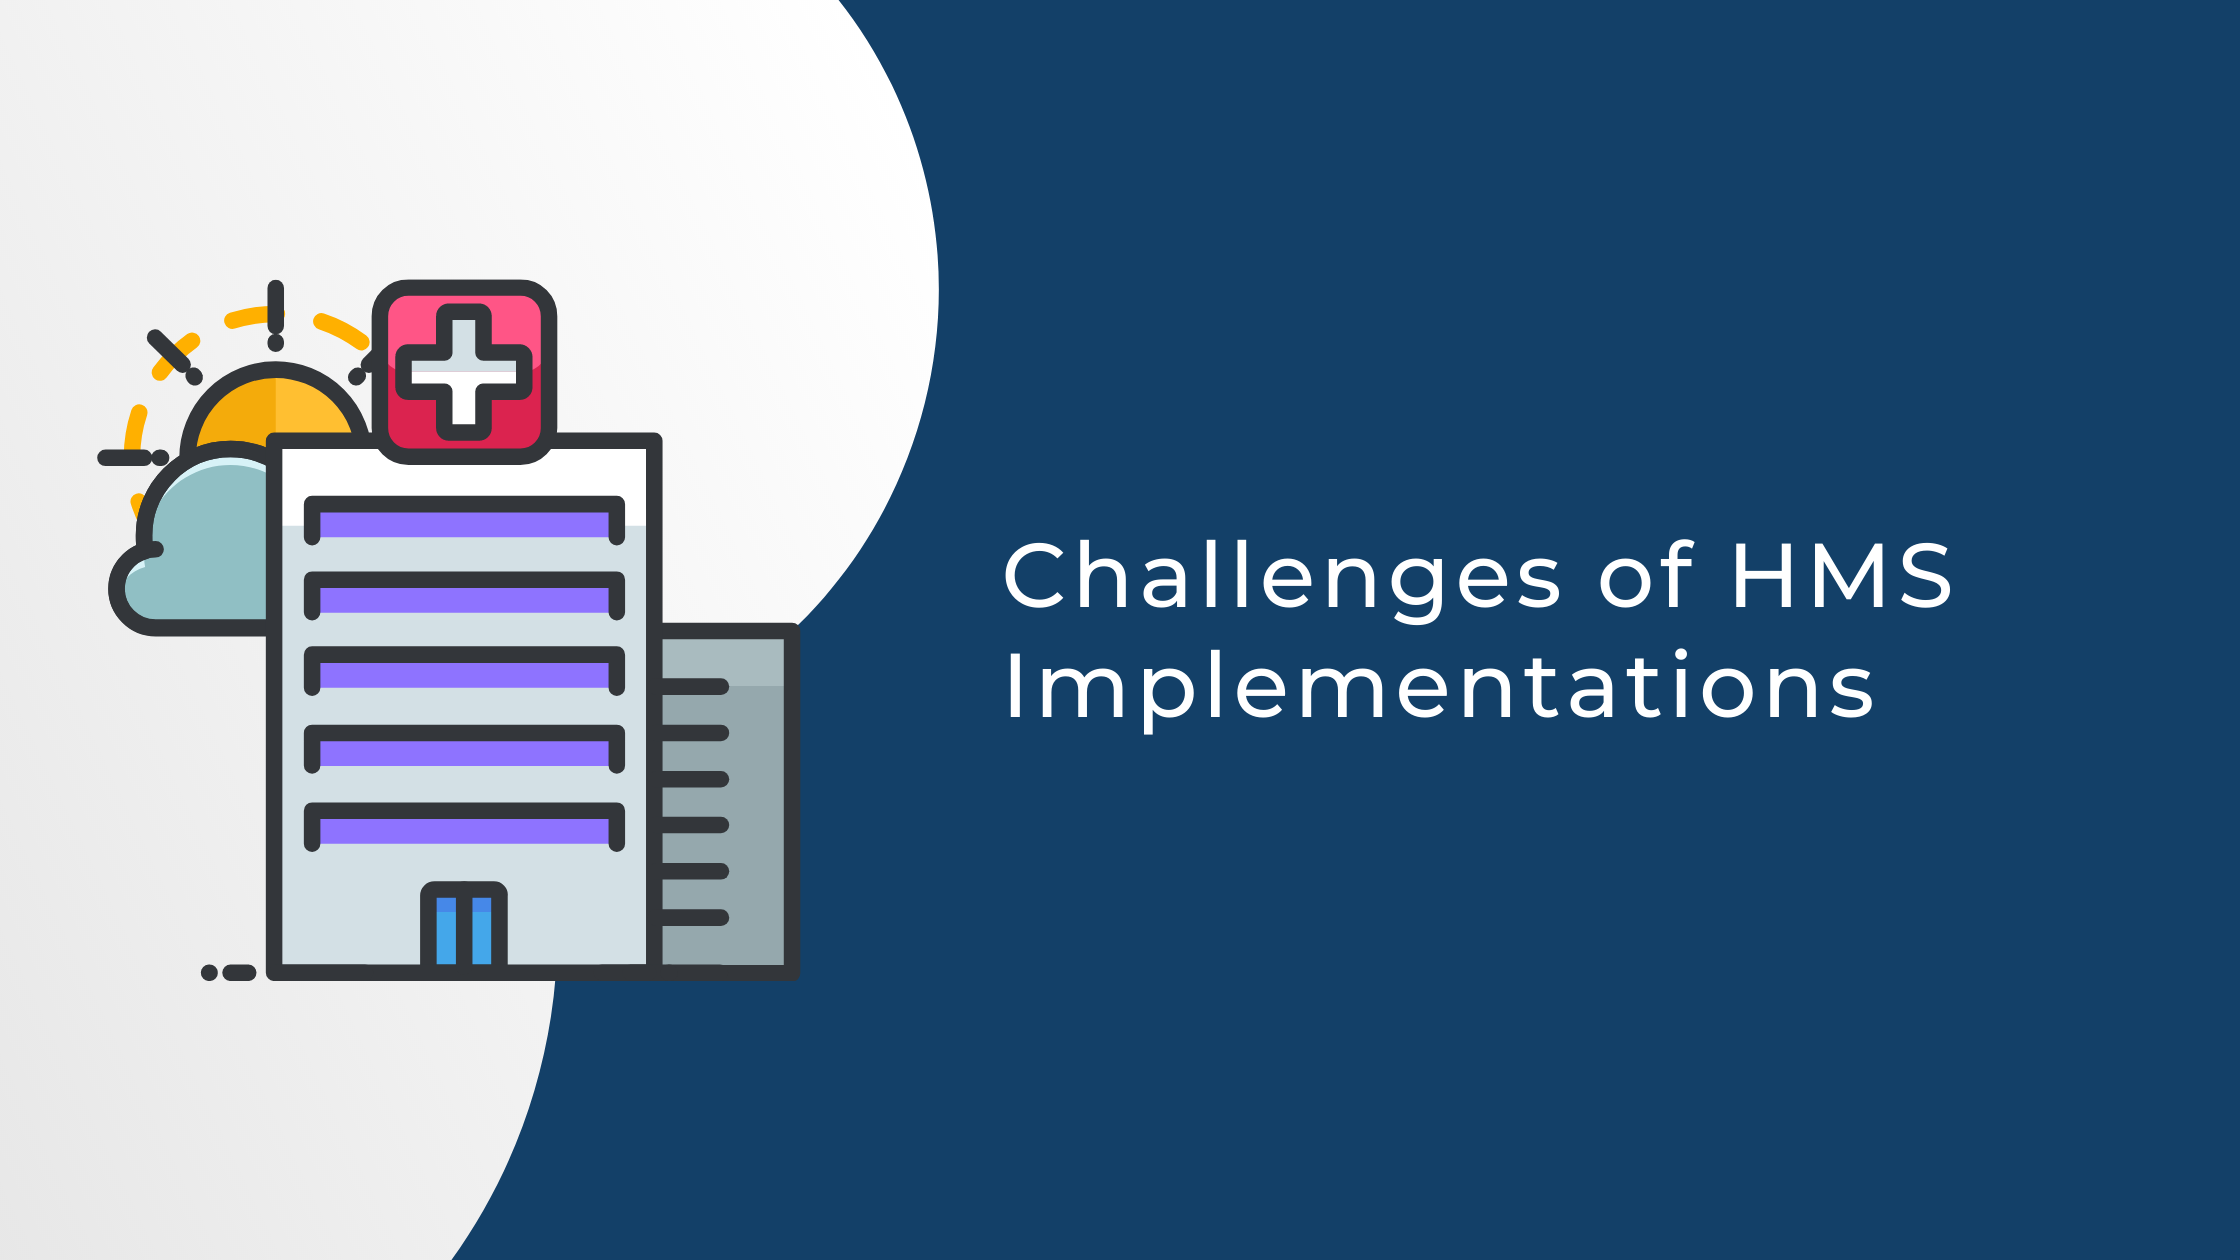 Challenges of Hospital Management Software Implementations at Clinics